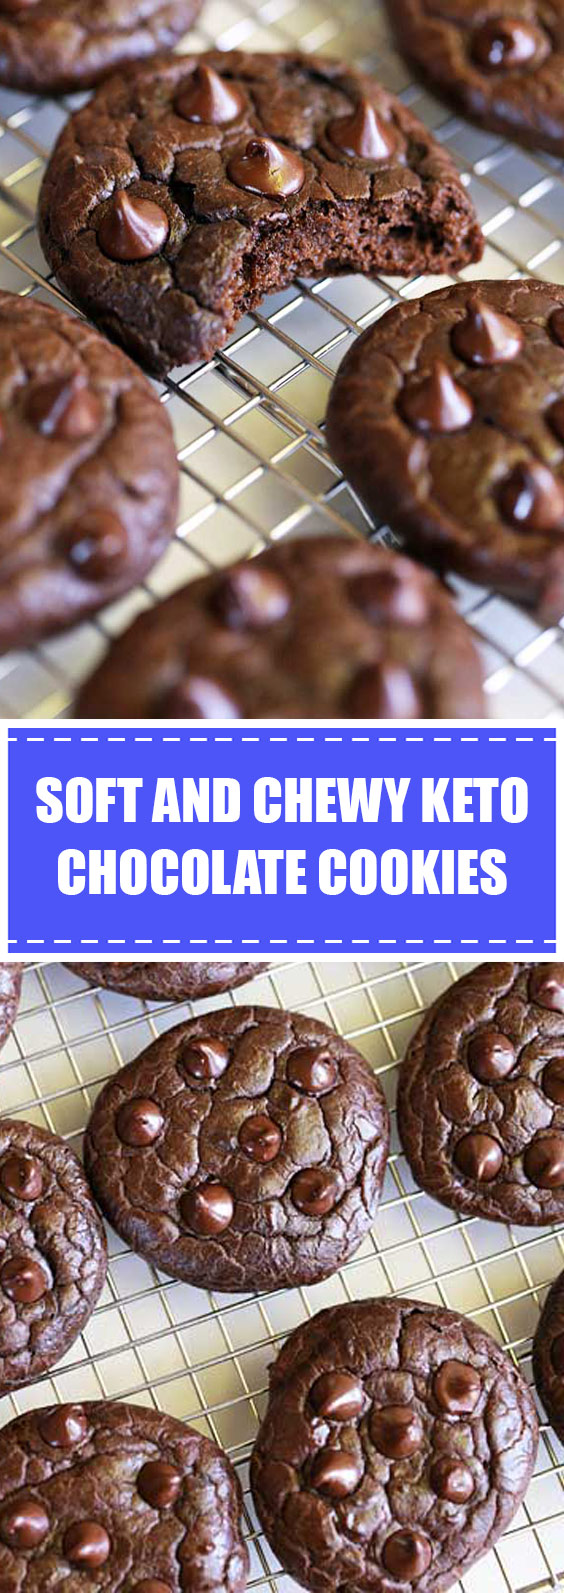 Soft and Chewy Keto Chocolate Cookies - Cullinary Recipes